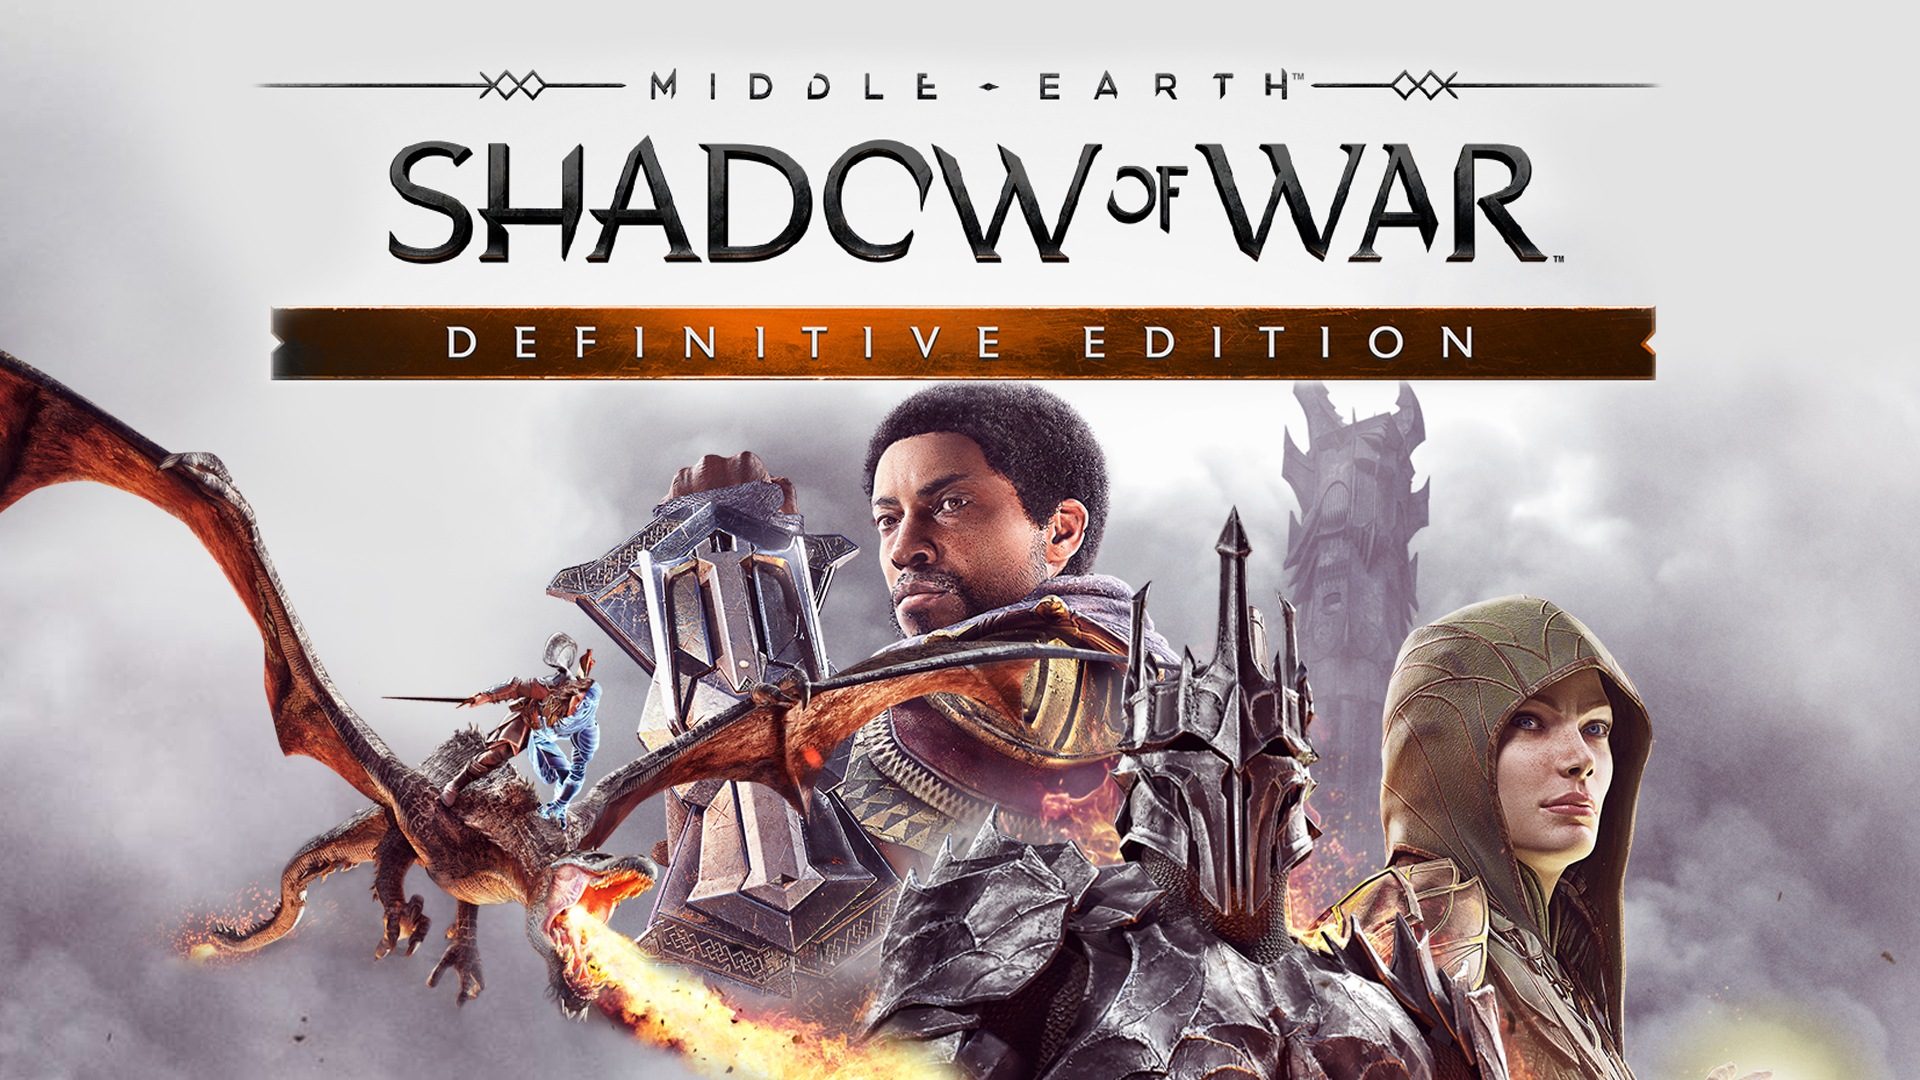 middle-earth-shadow-of-war-e28093-definitive-edition-free-download-8293926